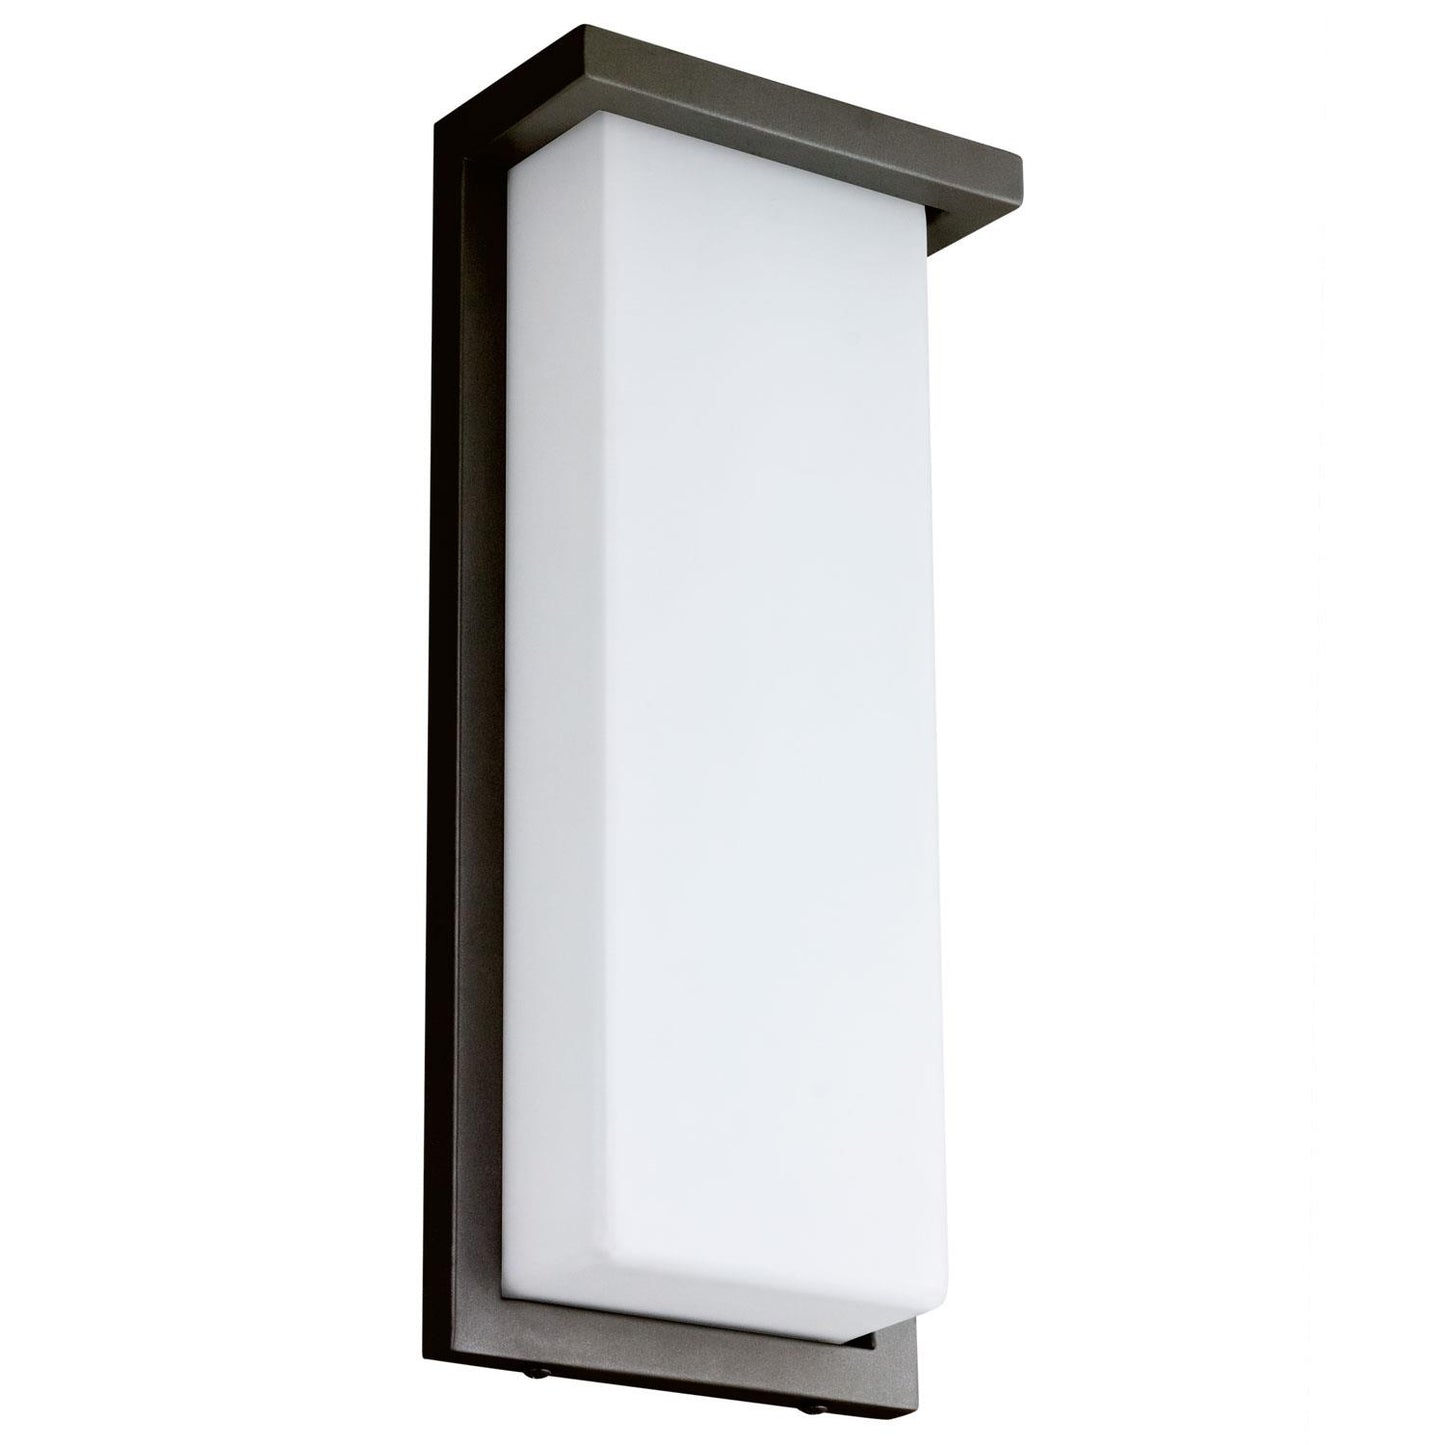 Sunlite 81078-SU LED 14" Modern Wall Sconce Light Fixture, 20 Watts (100W Equivalent), Oil Rubbed Bronze Finish, 1000 Lumens, Outdoor Use, ETL Listed, 30K - Warm White